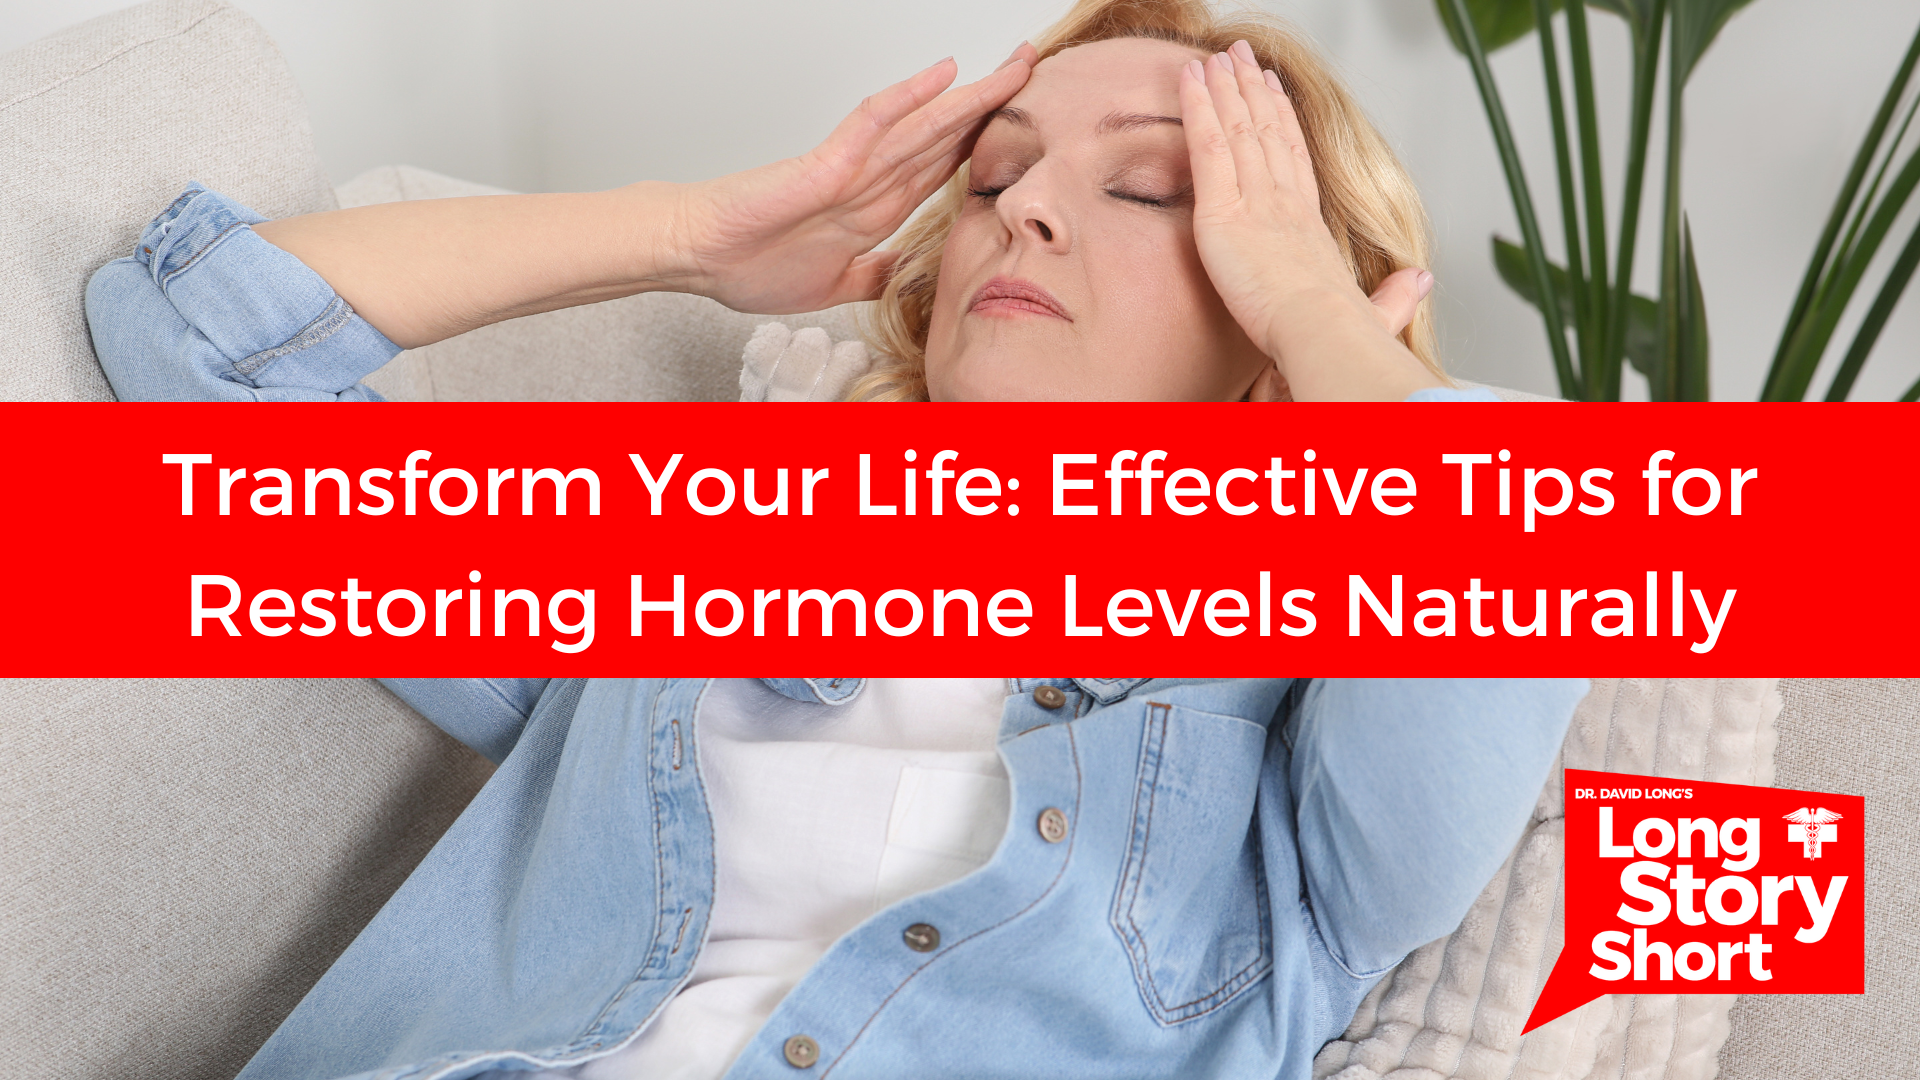 You are currently viewing Transform Your Life: Effective Tips for Restoring Hormone Levels Naturally